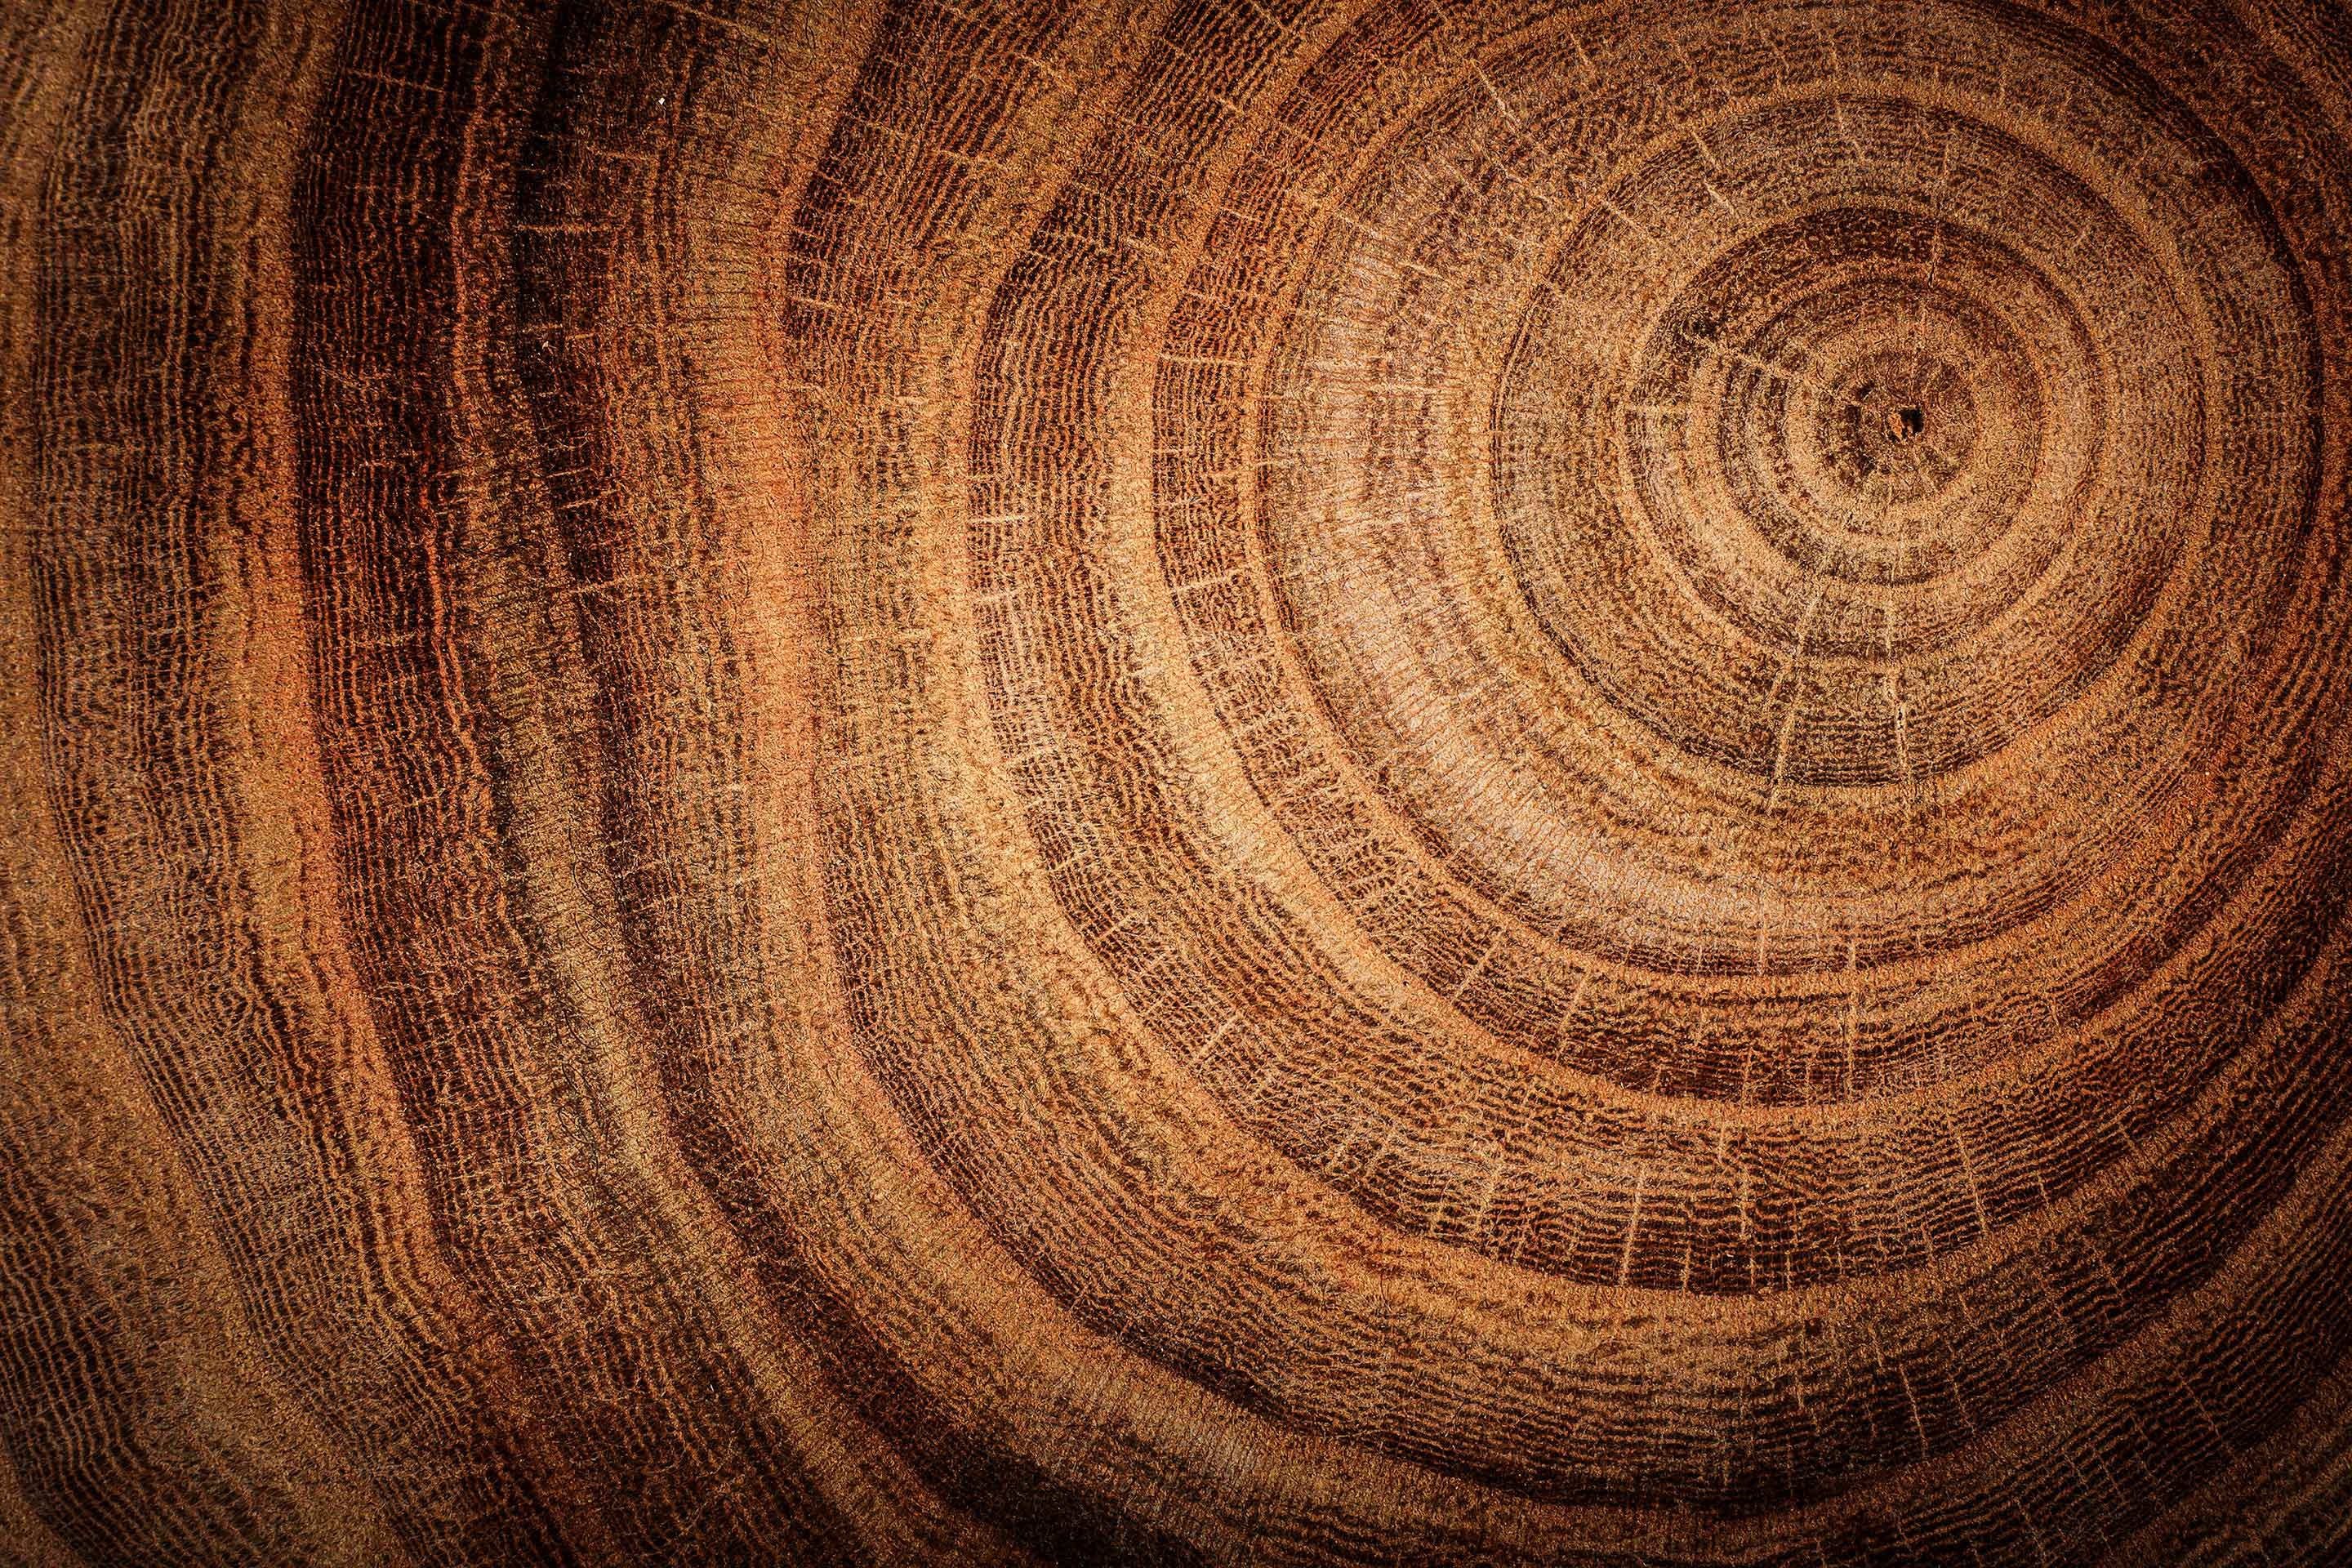 Close up of tree rings in a stump as a metaphor for long-term investing